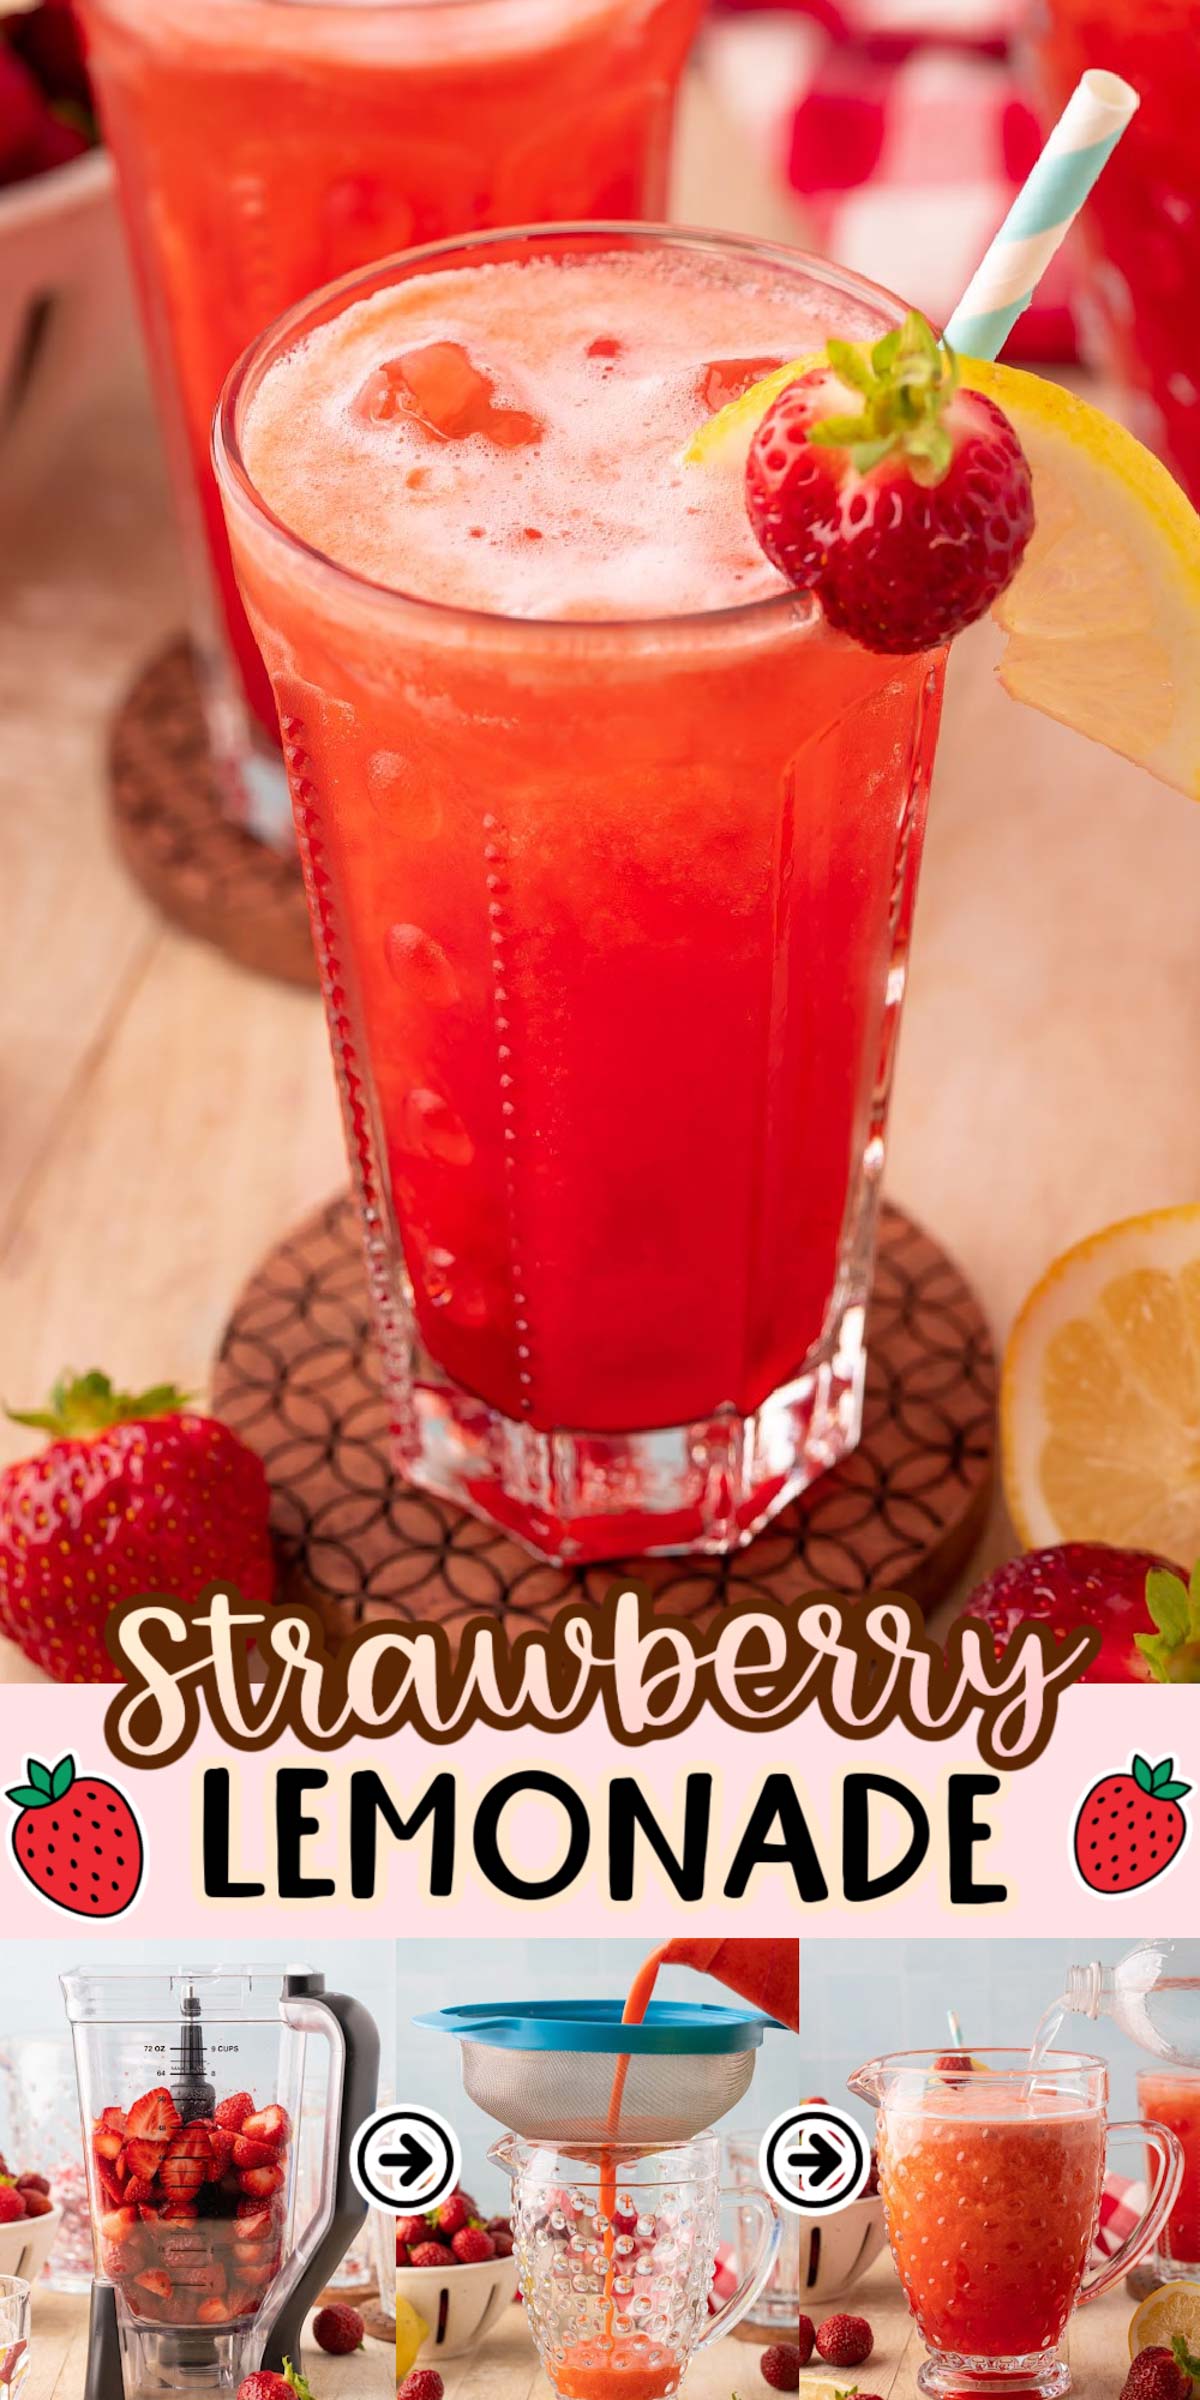 This Strawberry Lemonade is the perfect mix of bright lemons, sweet strawberries, and fizzy club soda - just what you need on a summer afternoon! via @sugarandsoulco